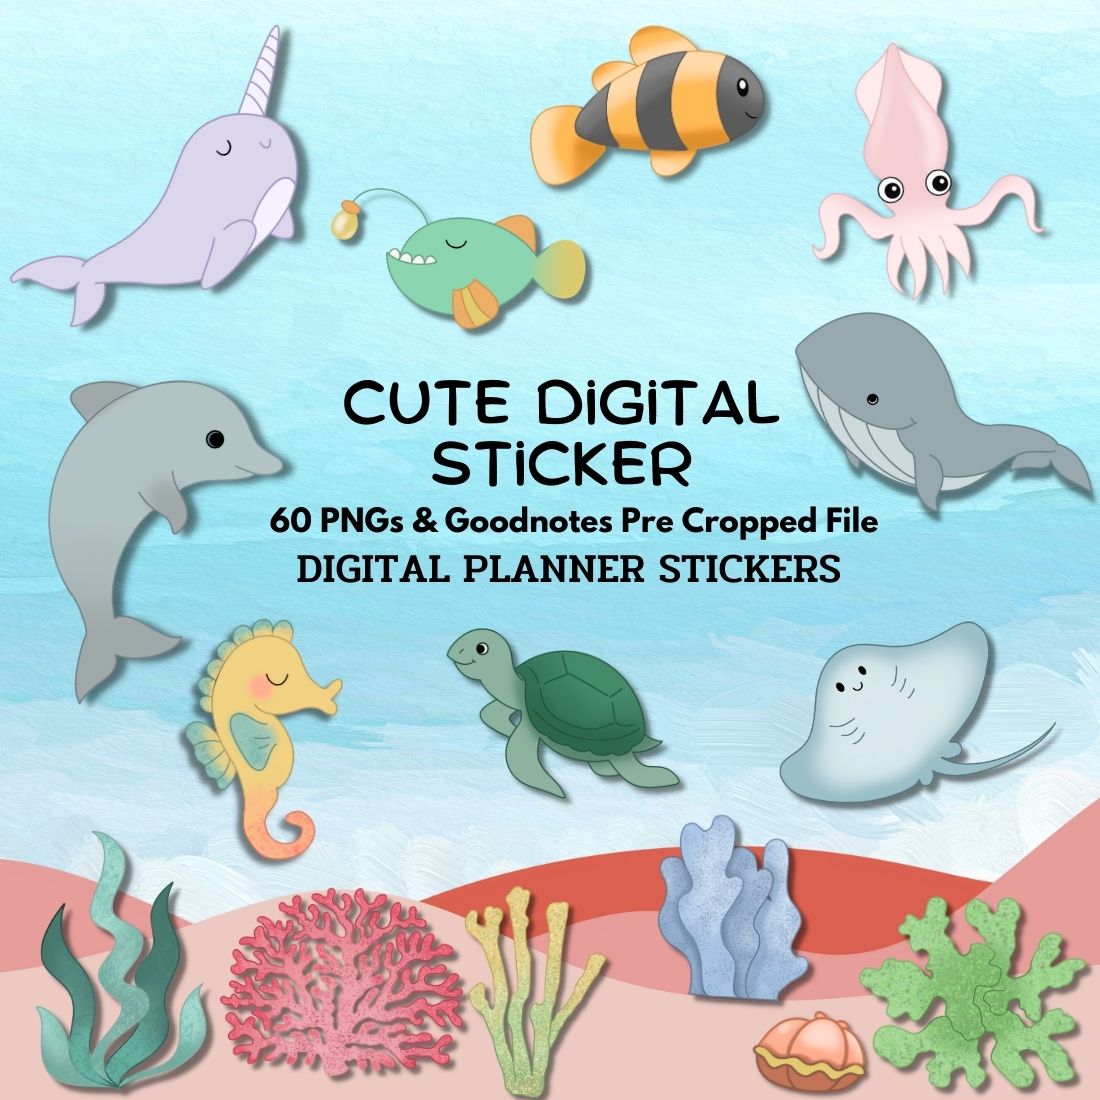 Underwater World Digital Sticker Pack - 60 PNG & Pre Cropped preview image.